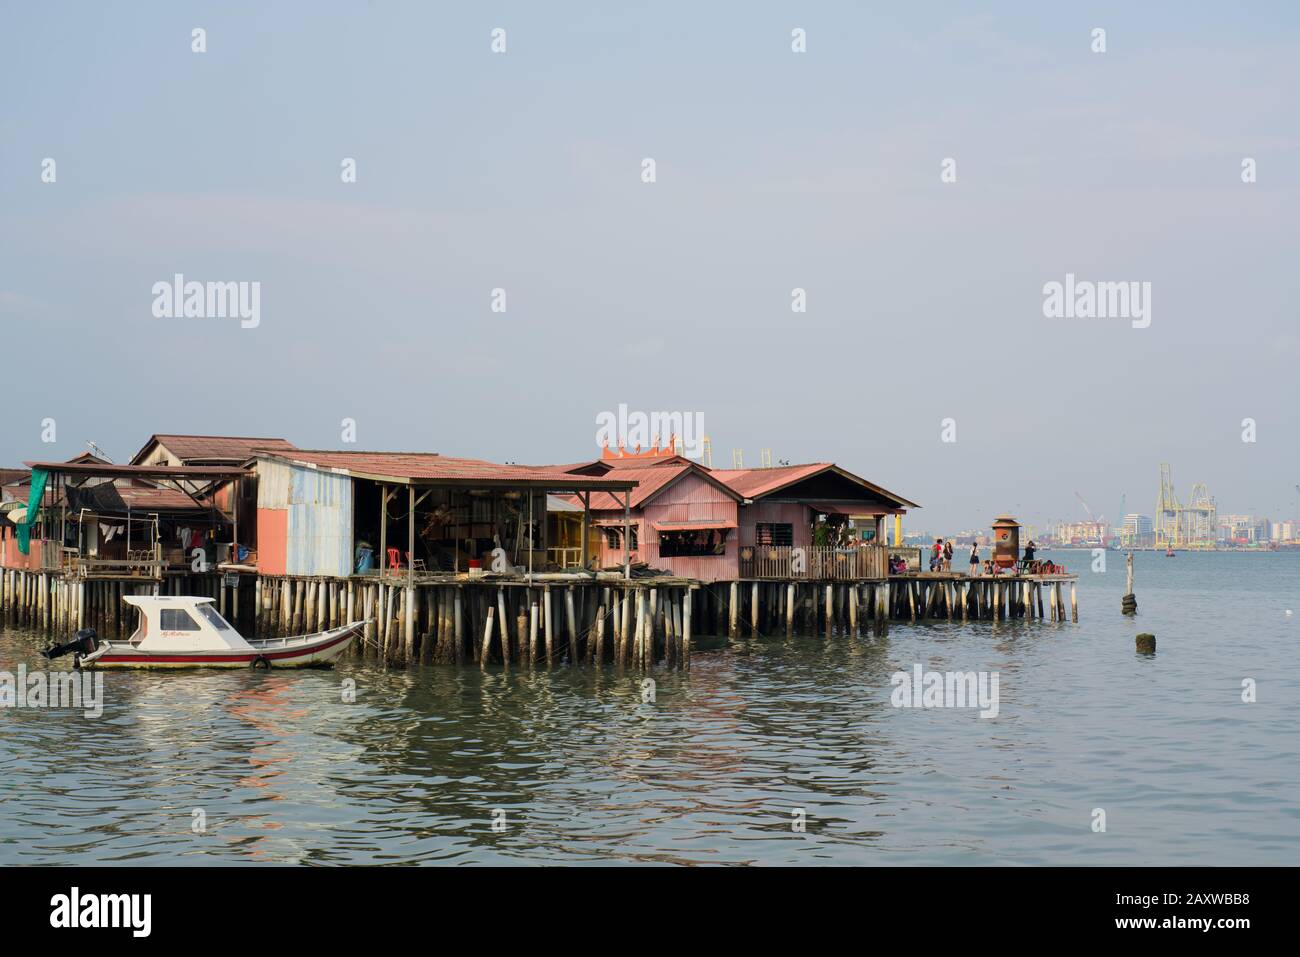 View of Chew Jetty from Tan Jetty, George Town, Penang, Malaysia Stock Photo